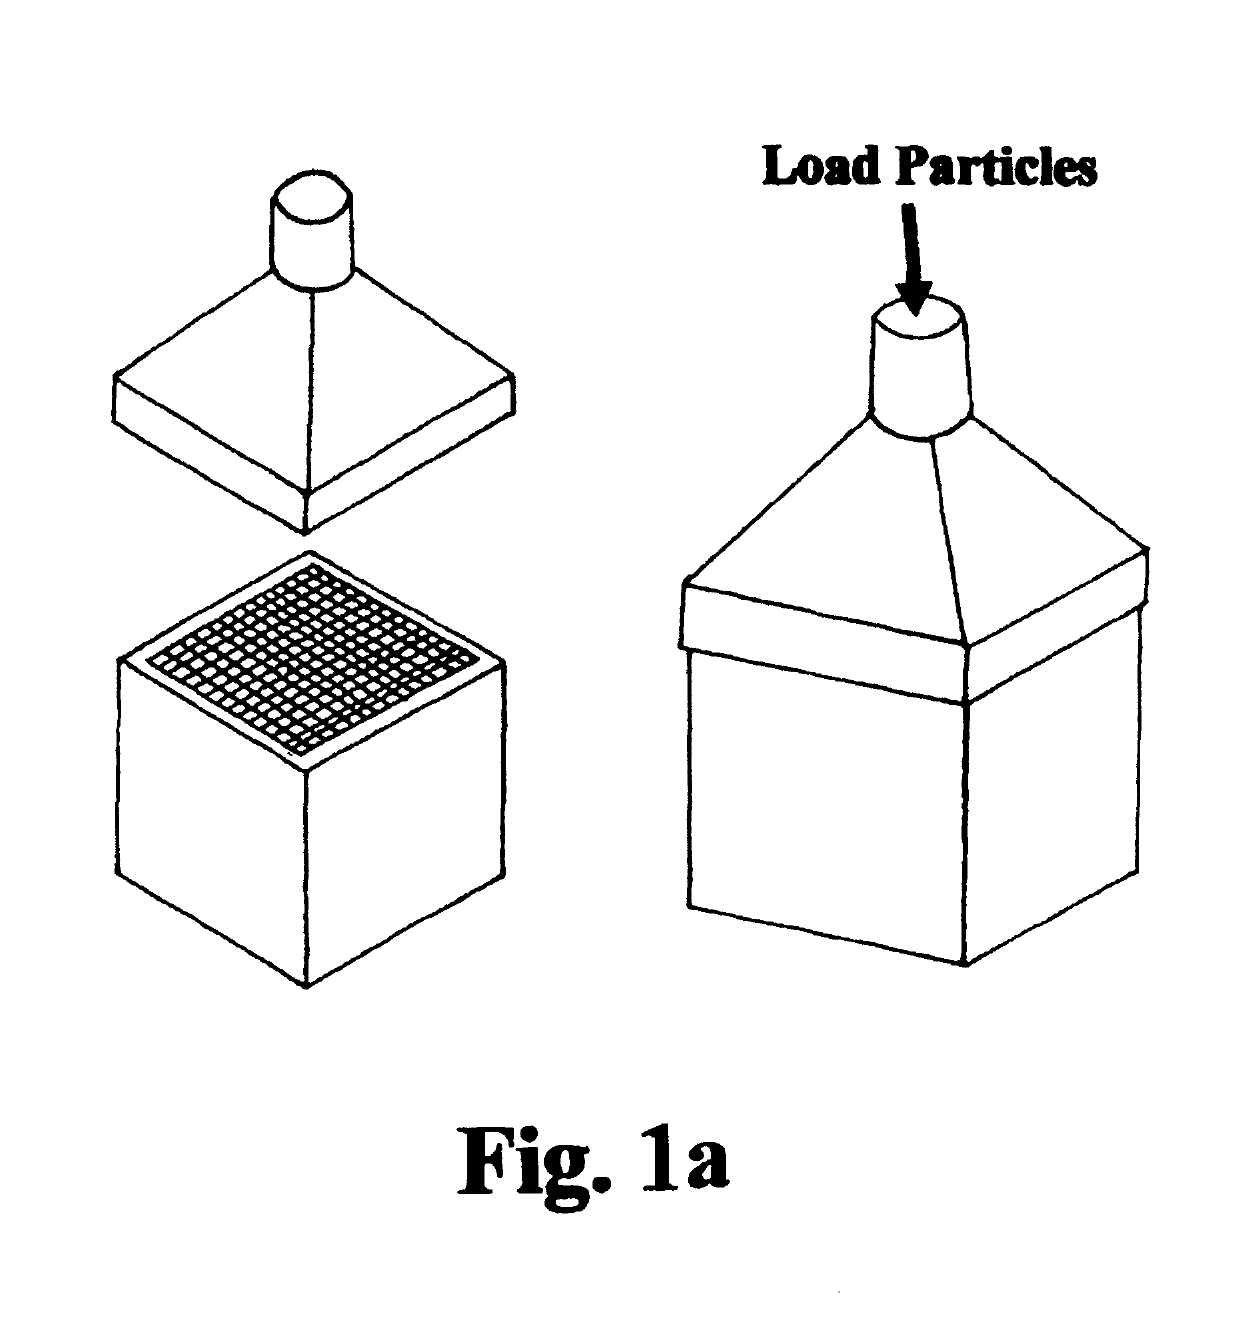 Loading/unloading of particulates to/from microchannel reactors